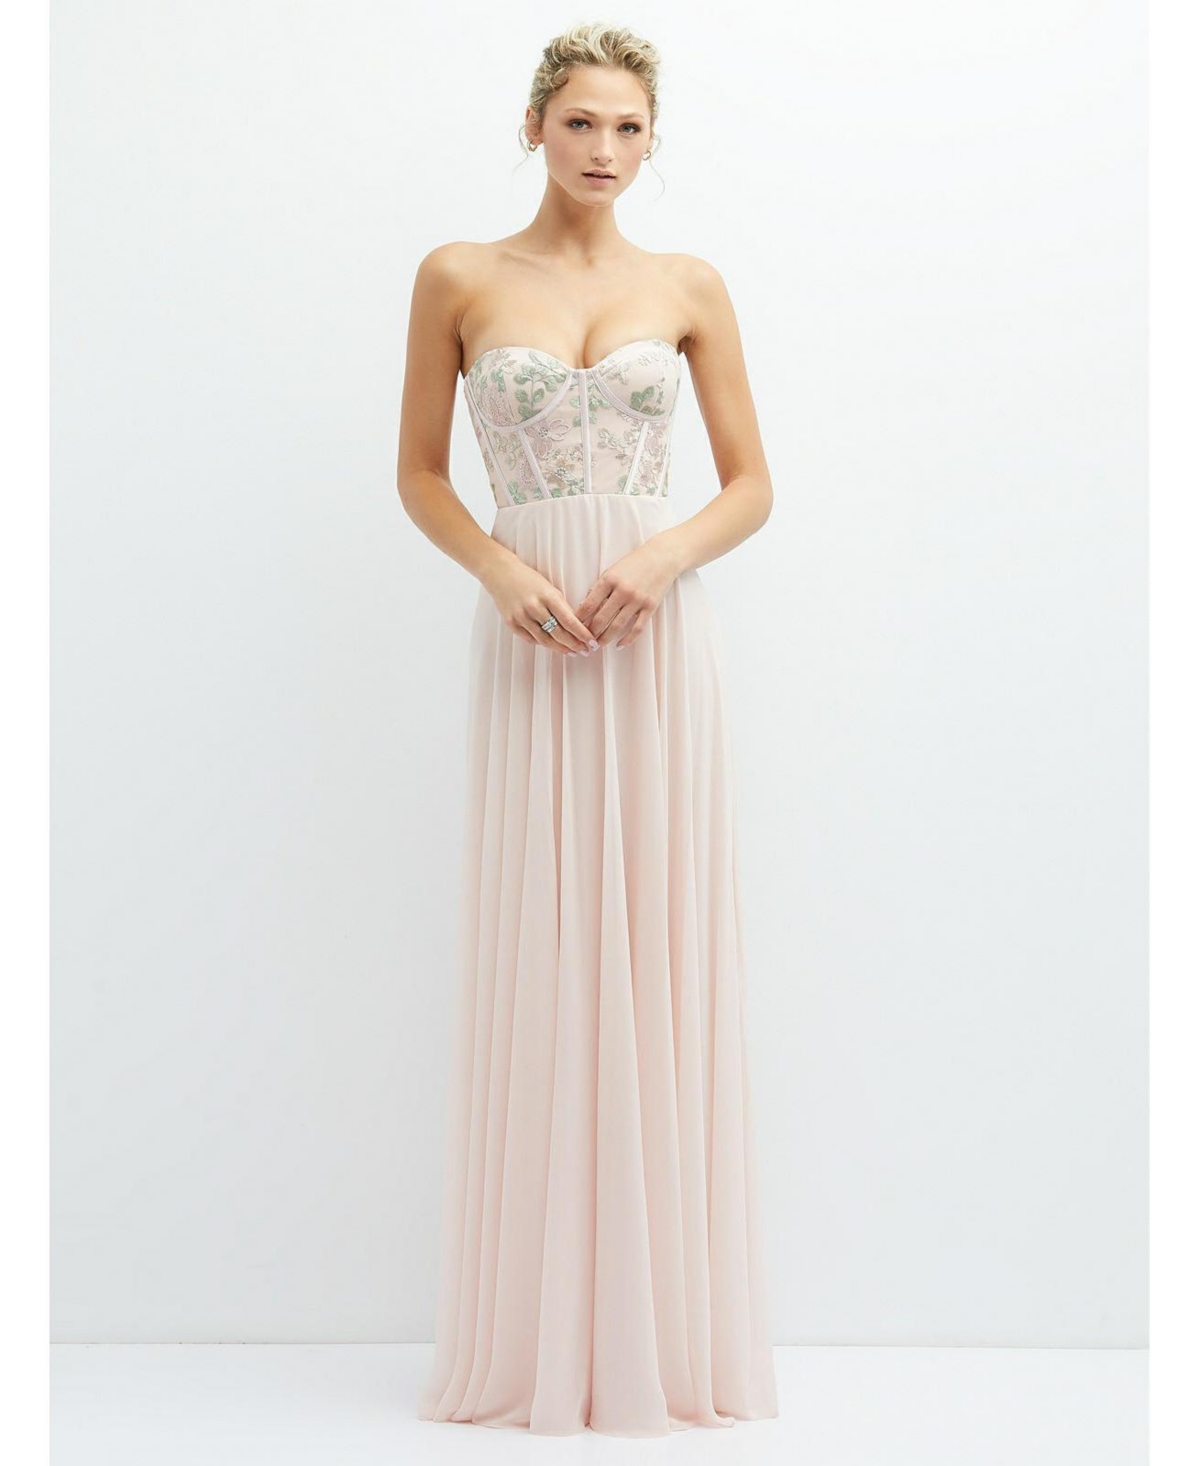 Strapless Floral Embroidered Corset Maxi Dress with Chiffon Skirt - Blush